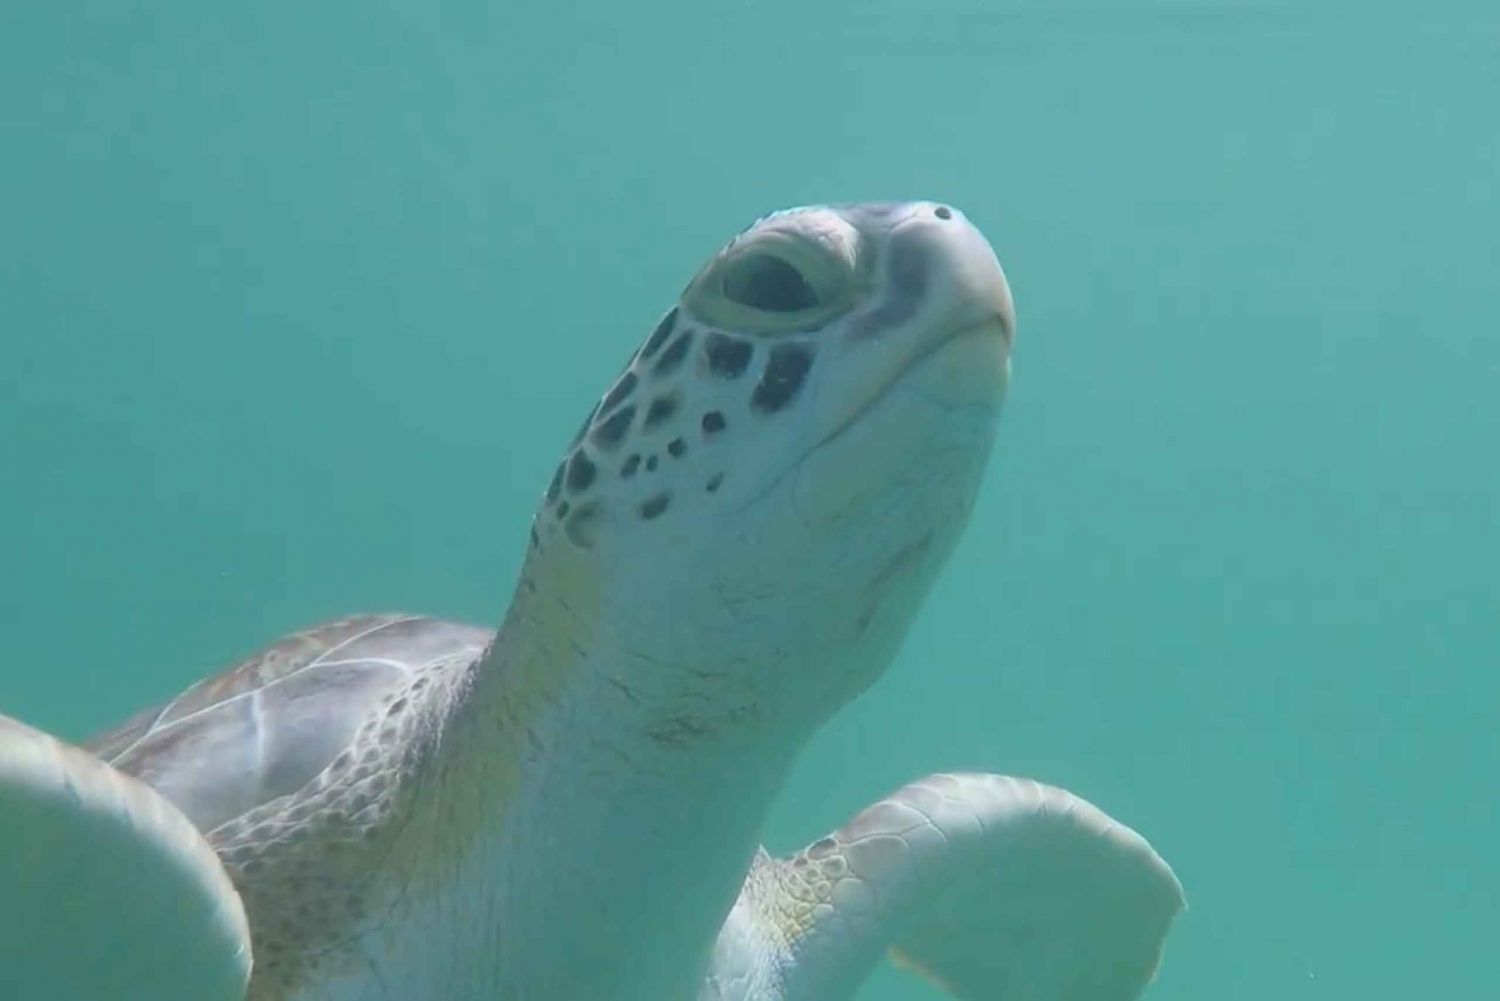 Nassau: Green Cay Tour & Snorkeling with Turtles